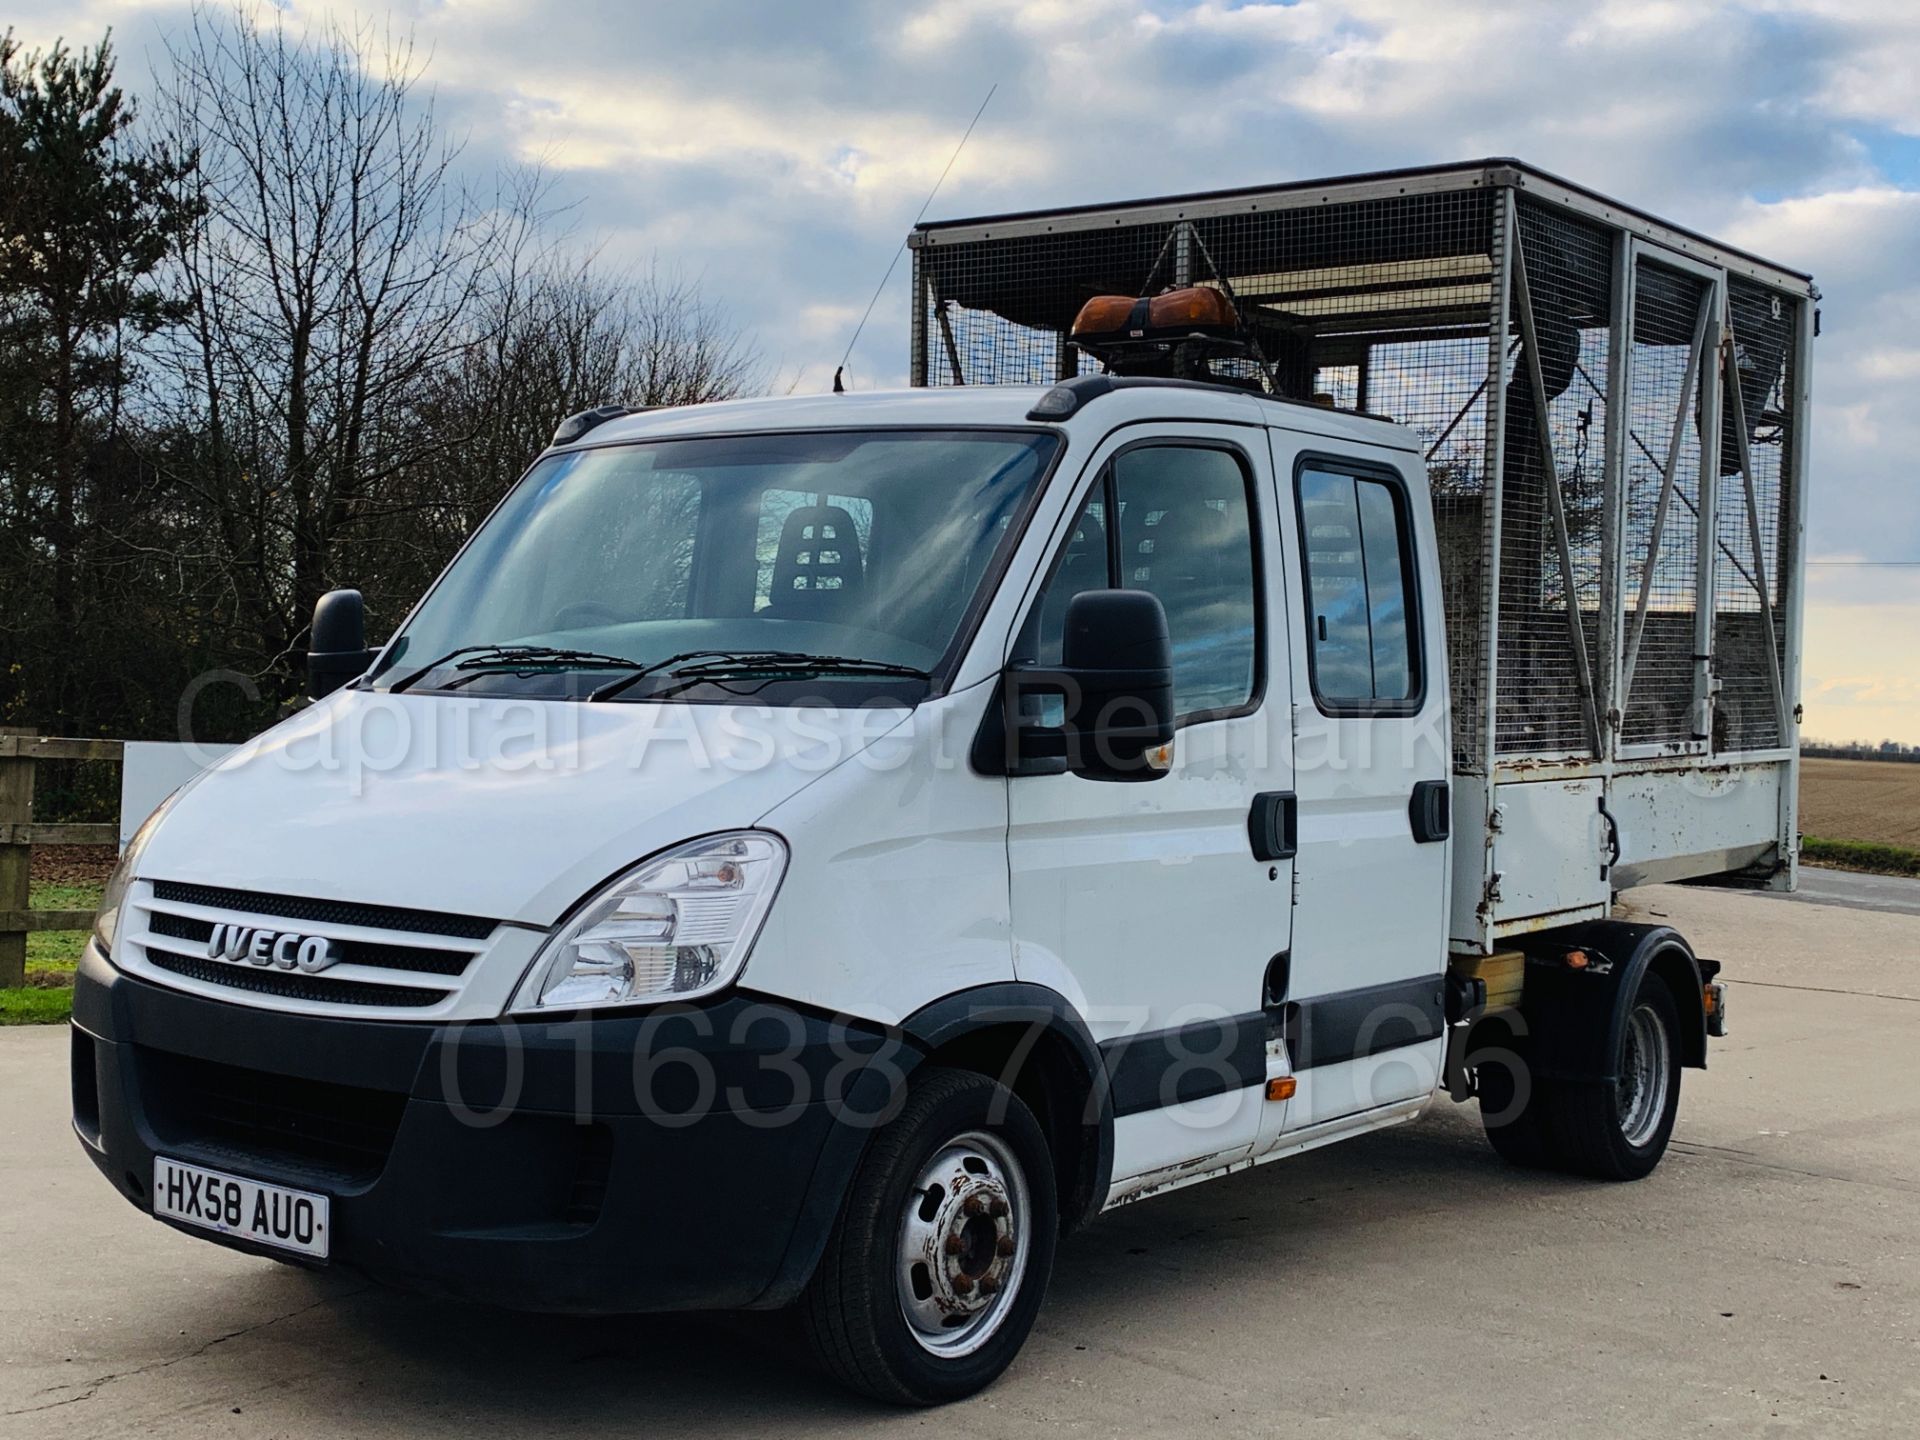 IVECO DAILY 35C12 *D/CAB - TIPPER* (2009 MODEL) '2.3 DIESEL - 115 BHP - 5 SPEED' *LOW MILES* - Image 34 of 39